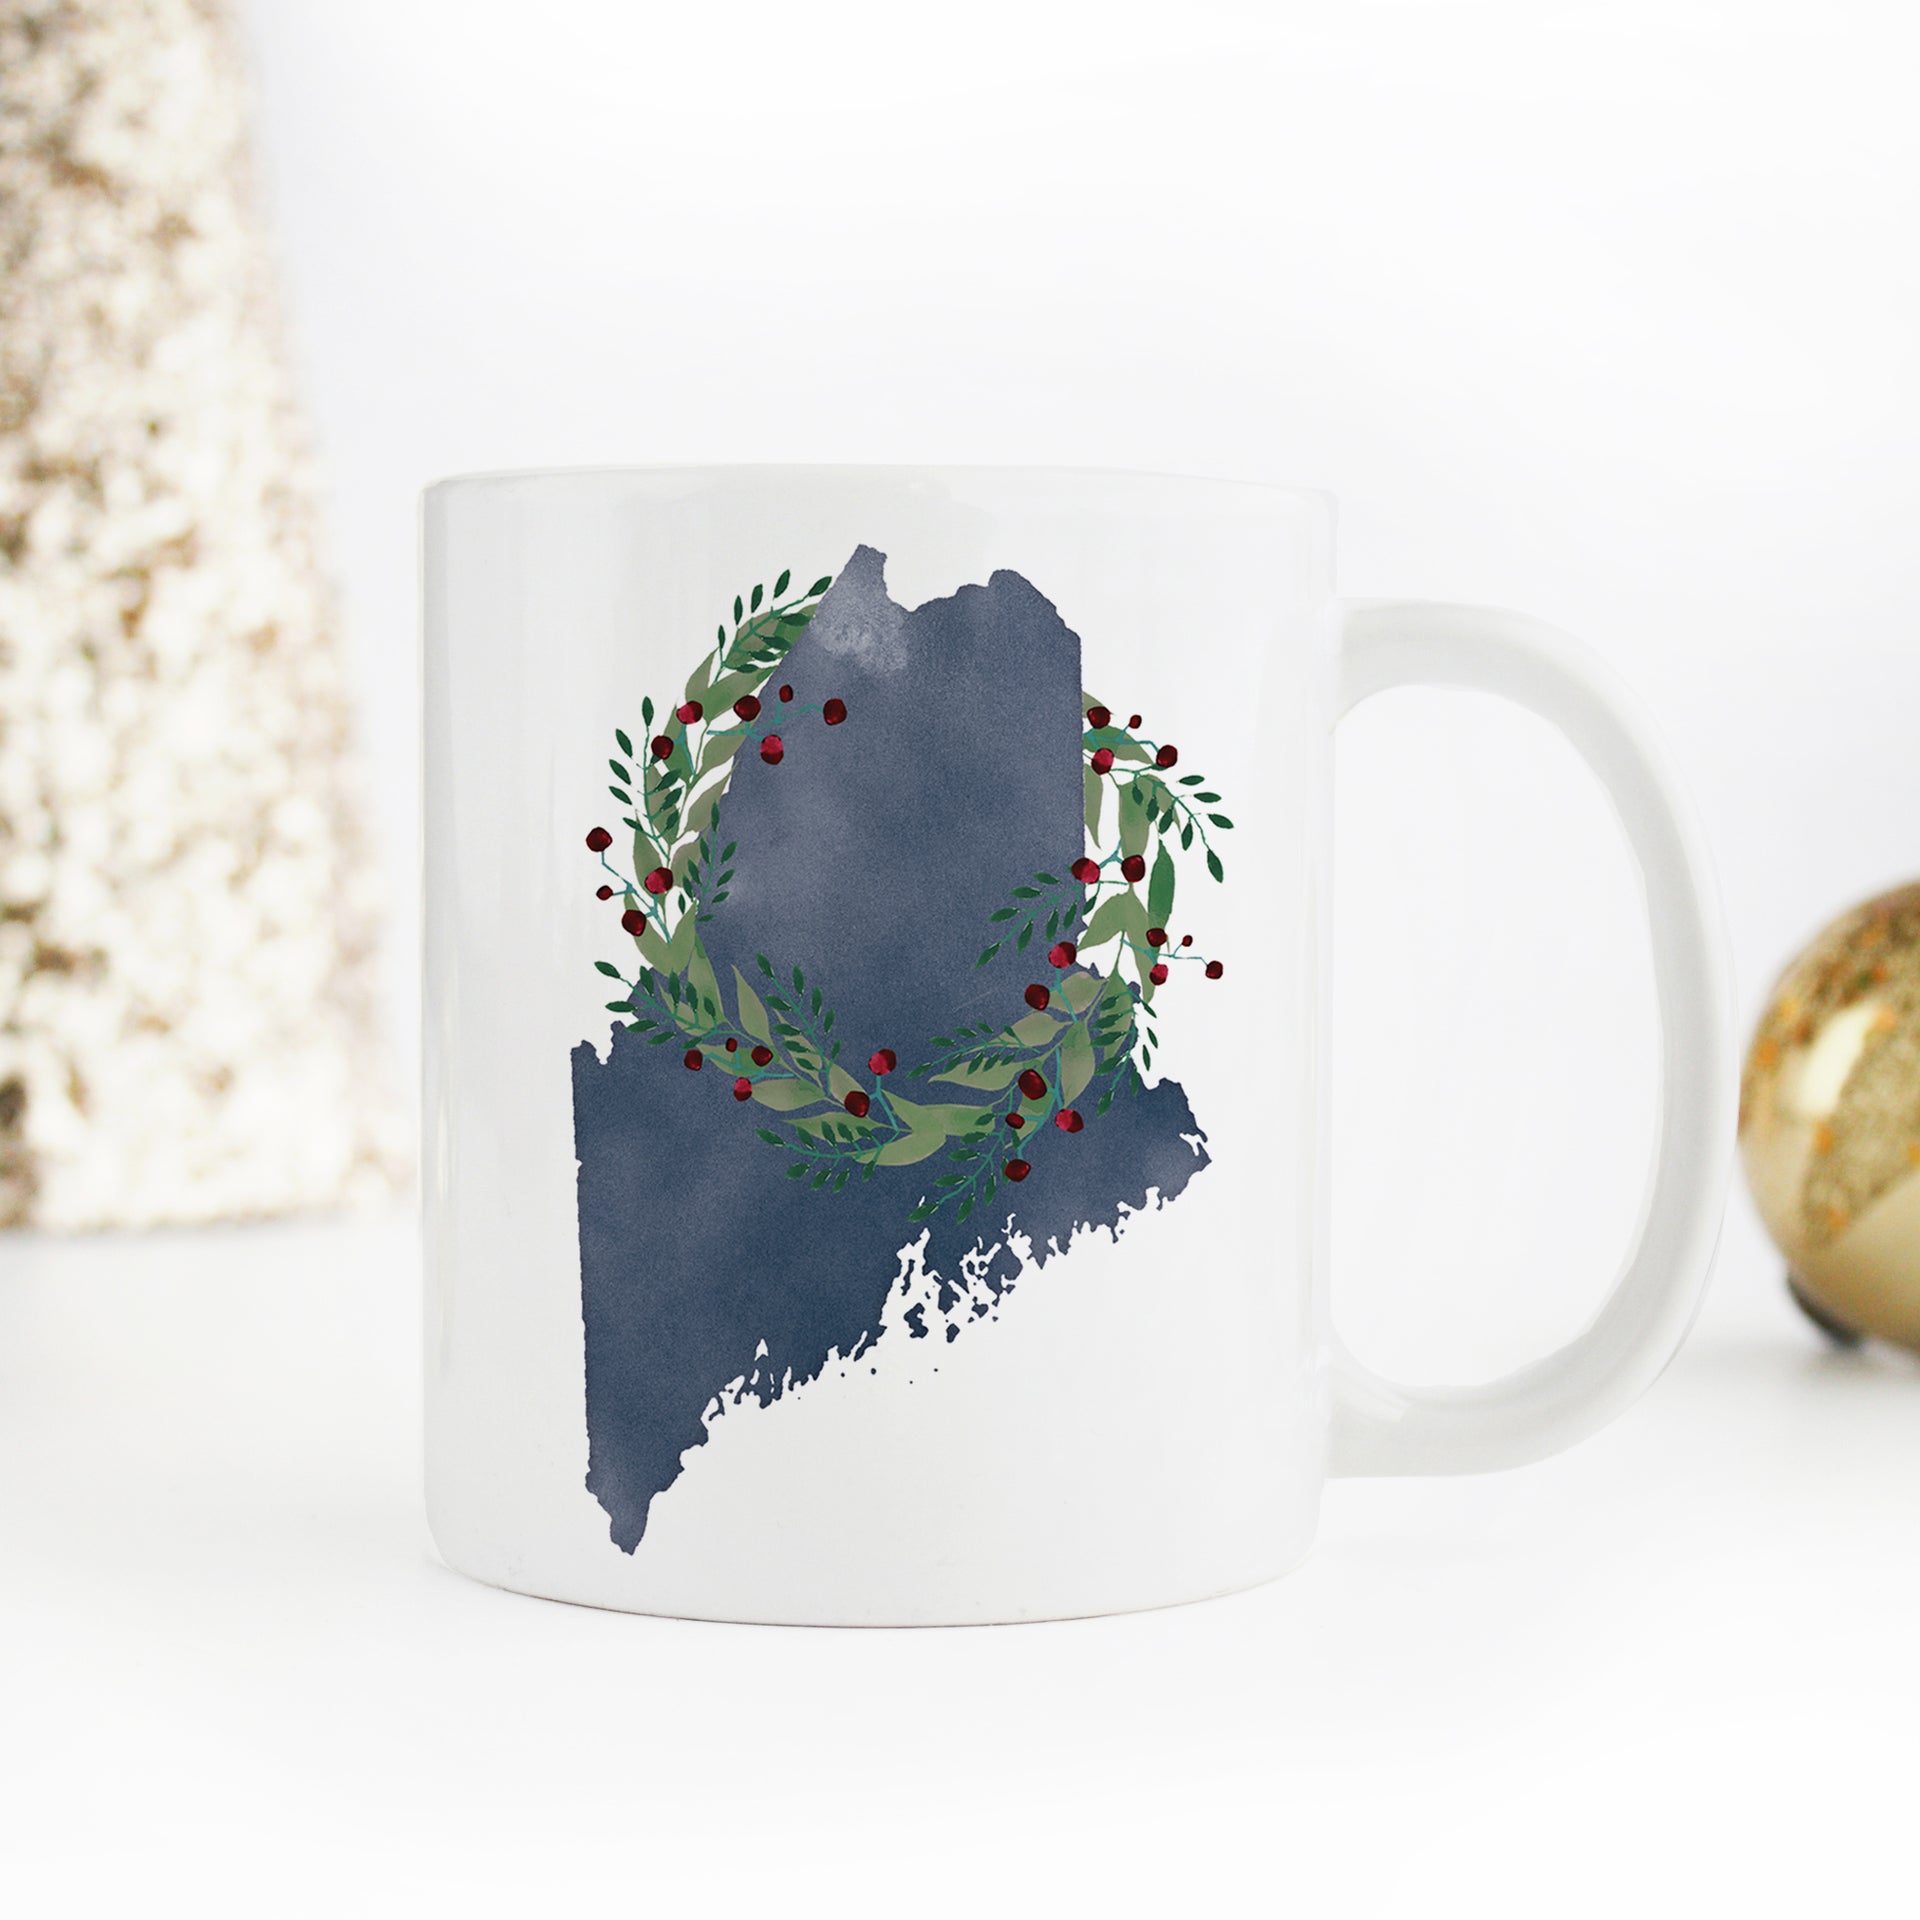 There's no place like Maine for the holidays Mug by Gert & Co